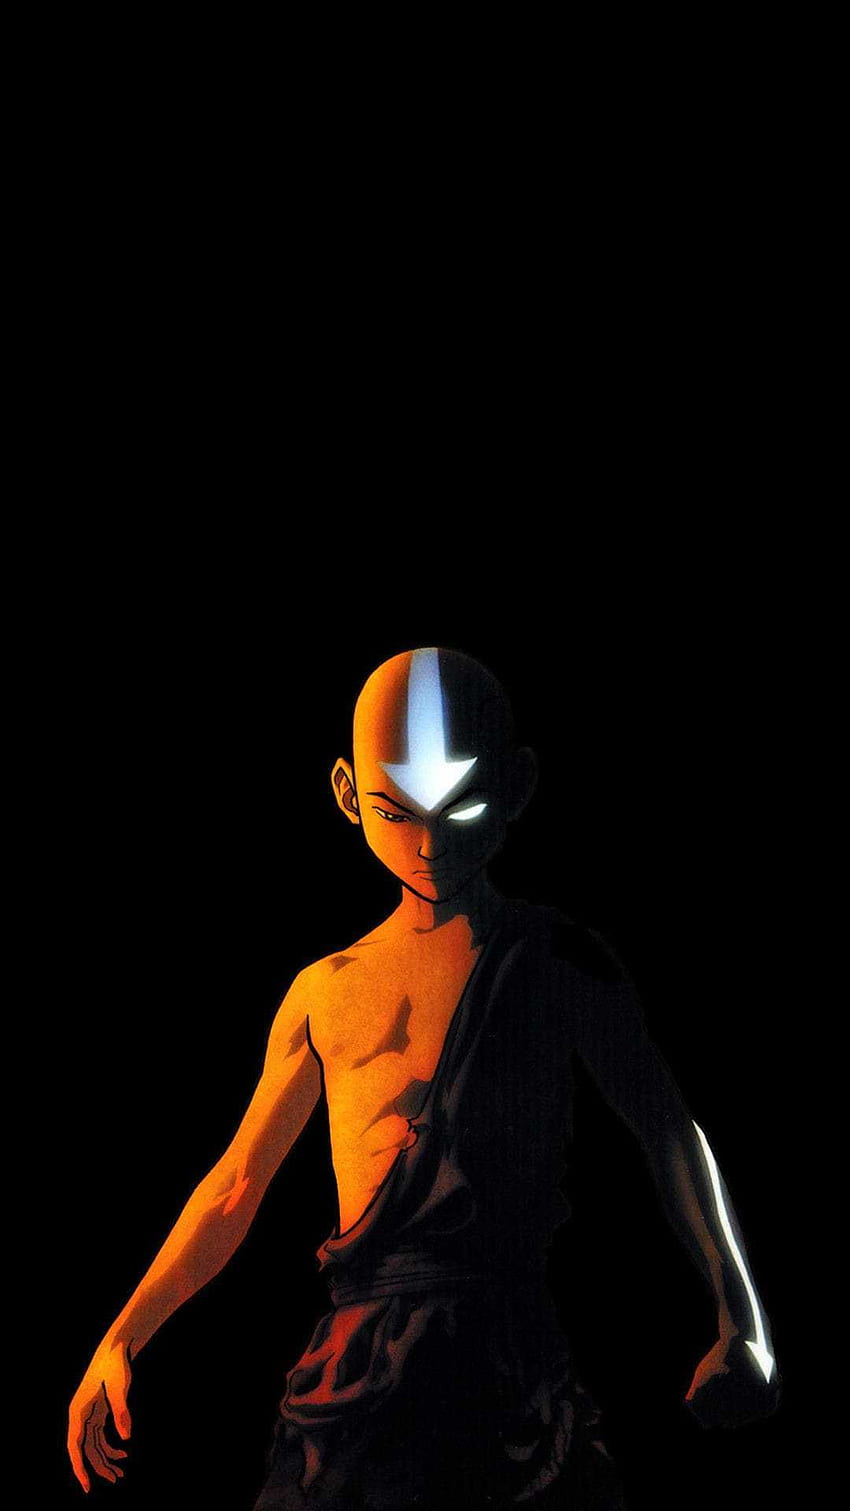 Avatar Aang  minimalism Buddhism Avatar The Last Airbender  For You  For  Mobile Minimalist Buddhist HD phone wallpaper  Pxfuel